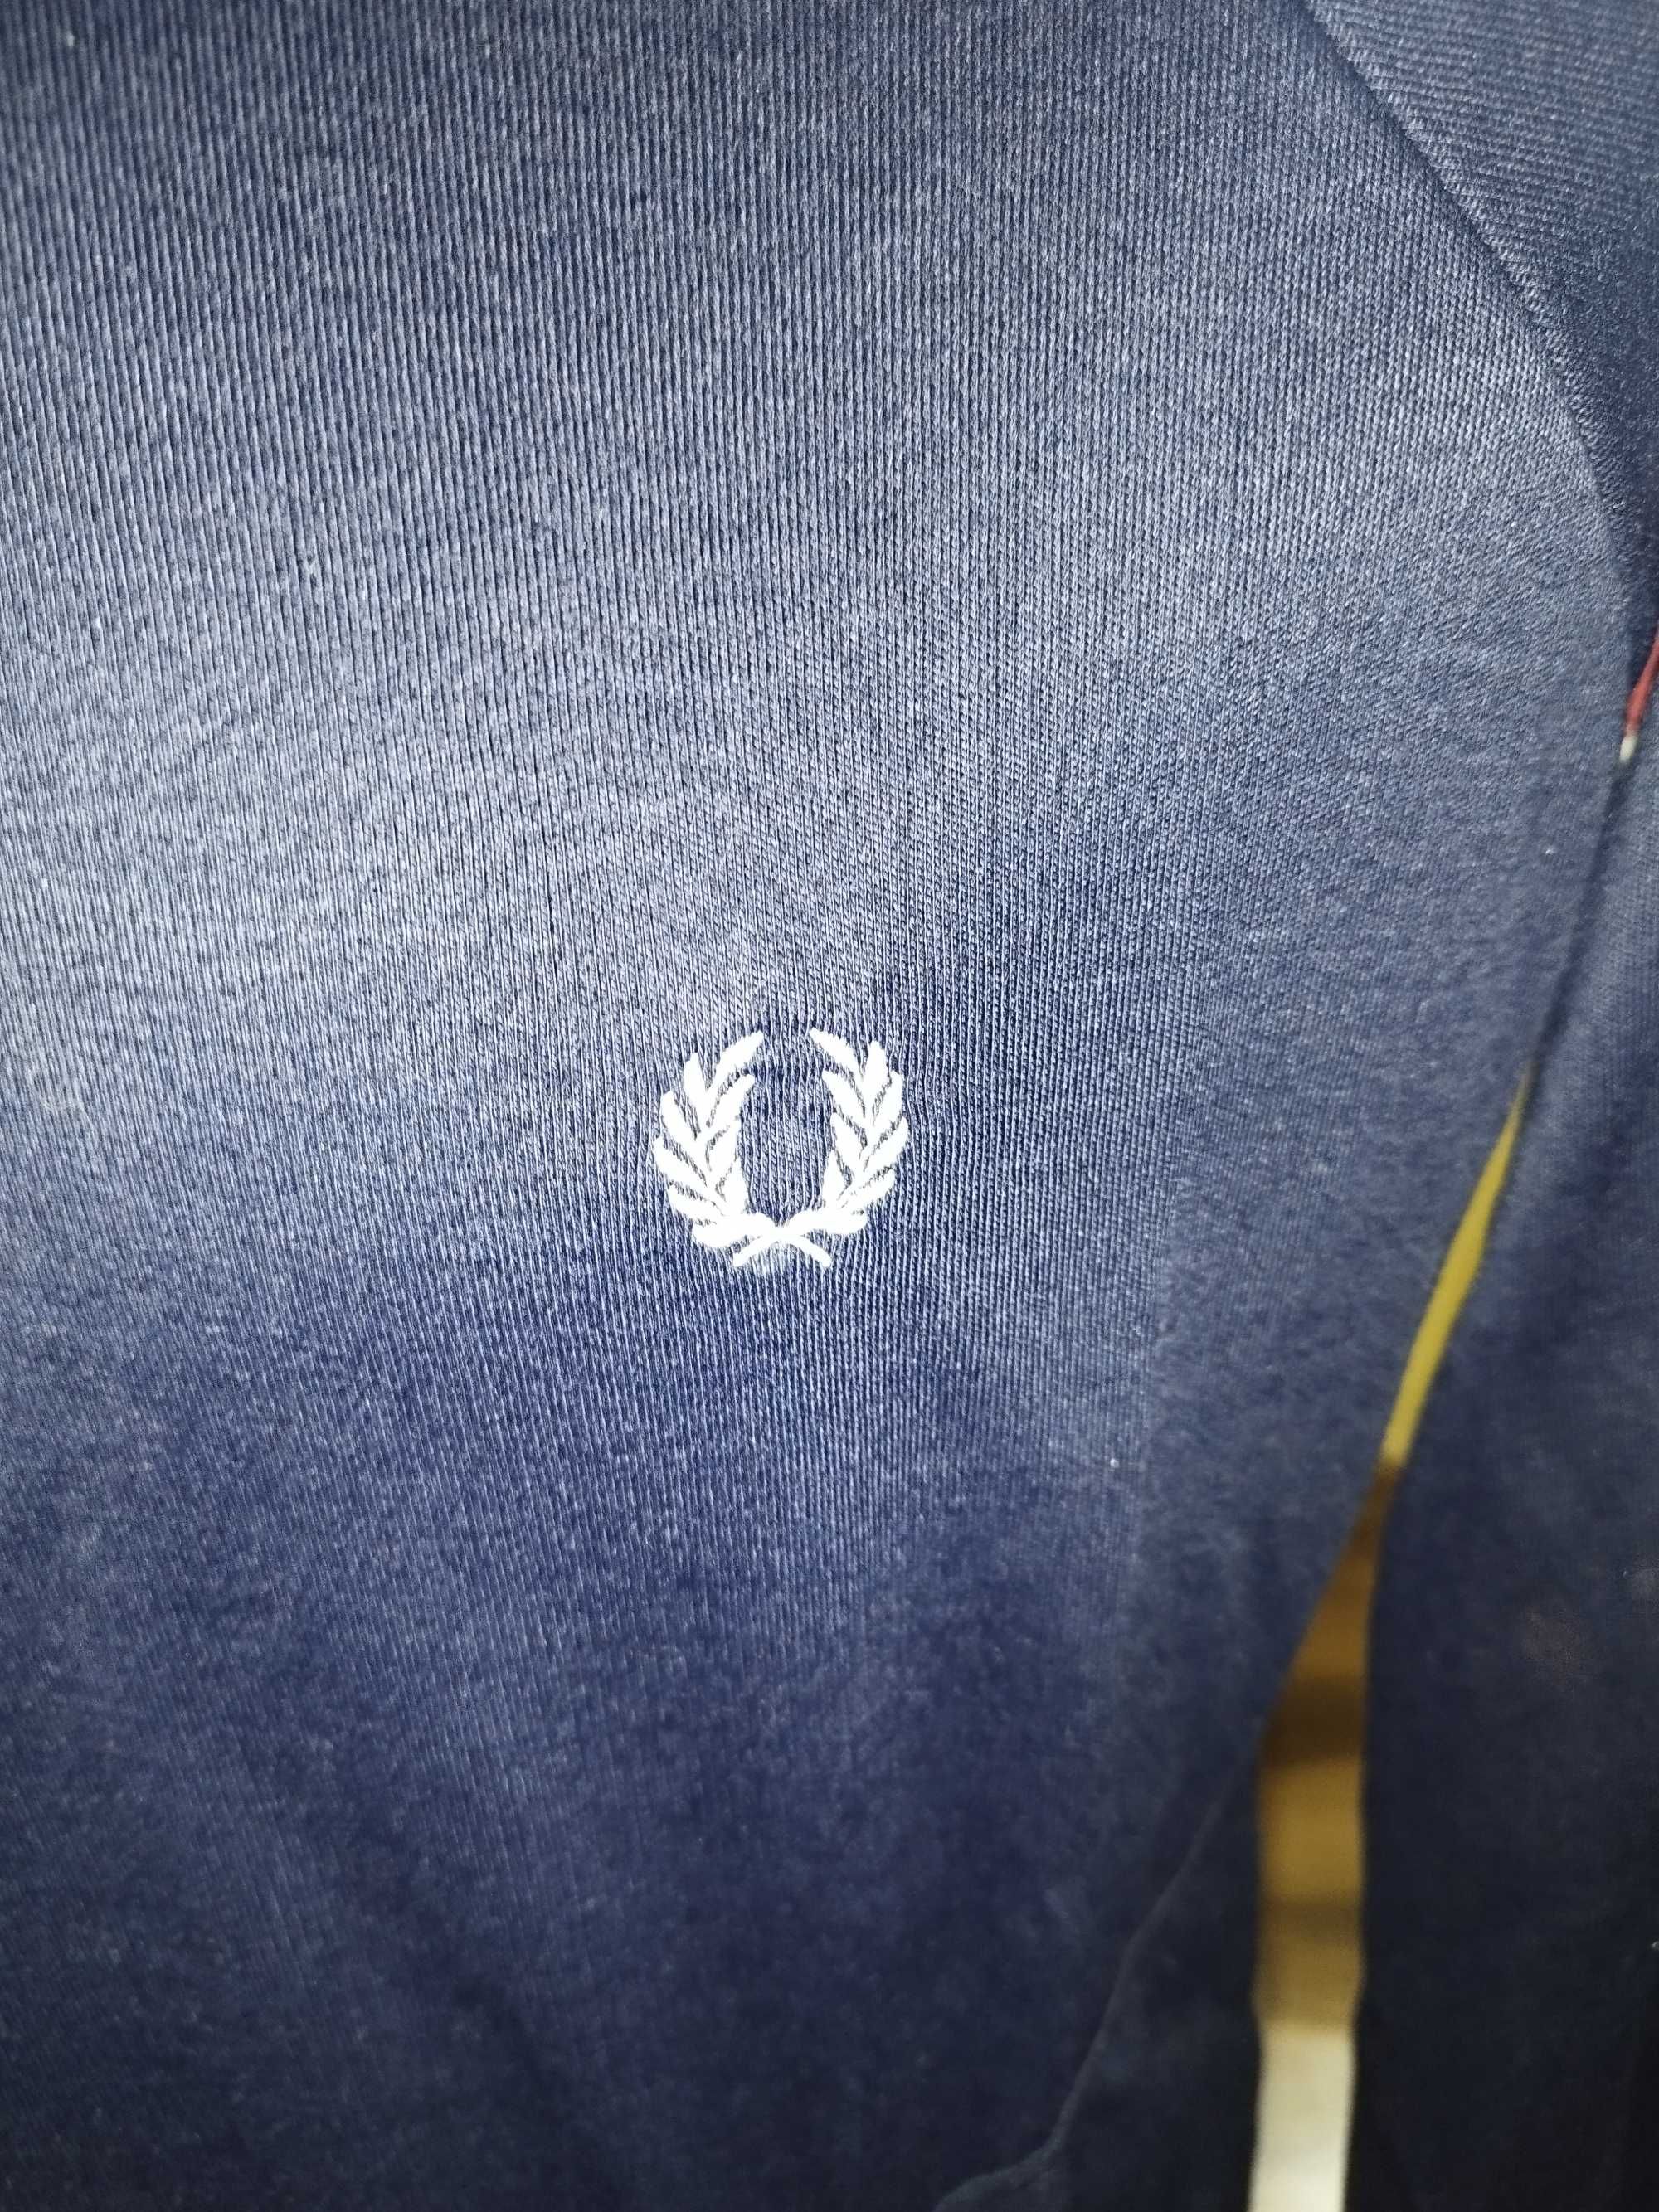 trening complet fred perry sports wear ultras retro vintage size M